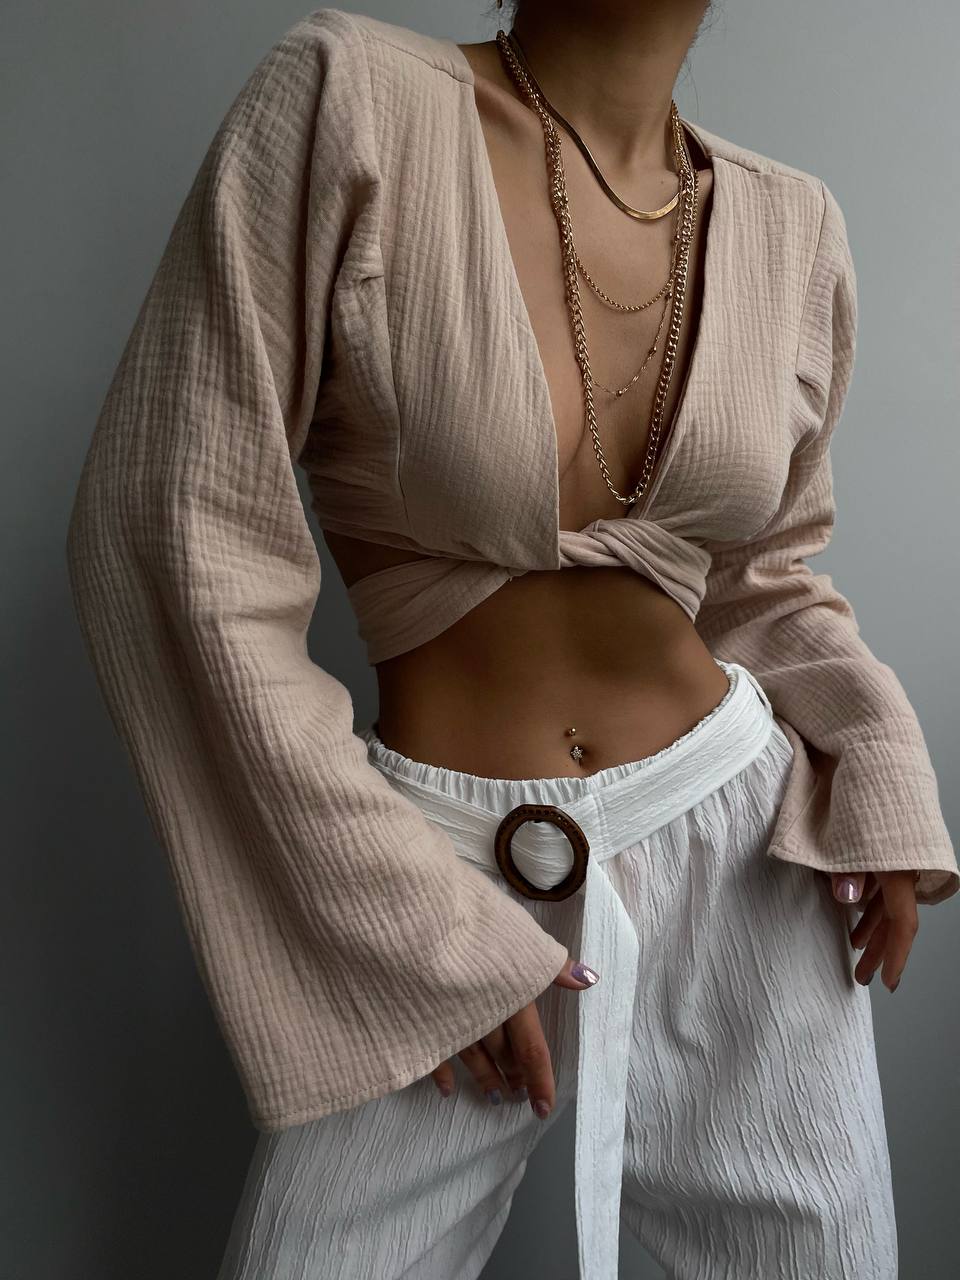 Diana Long Sleeve Cropped Blouse / Beige & White